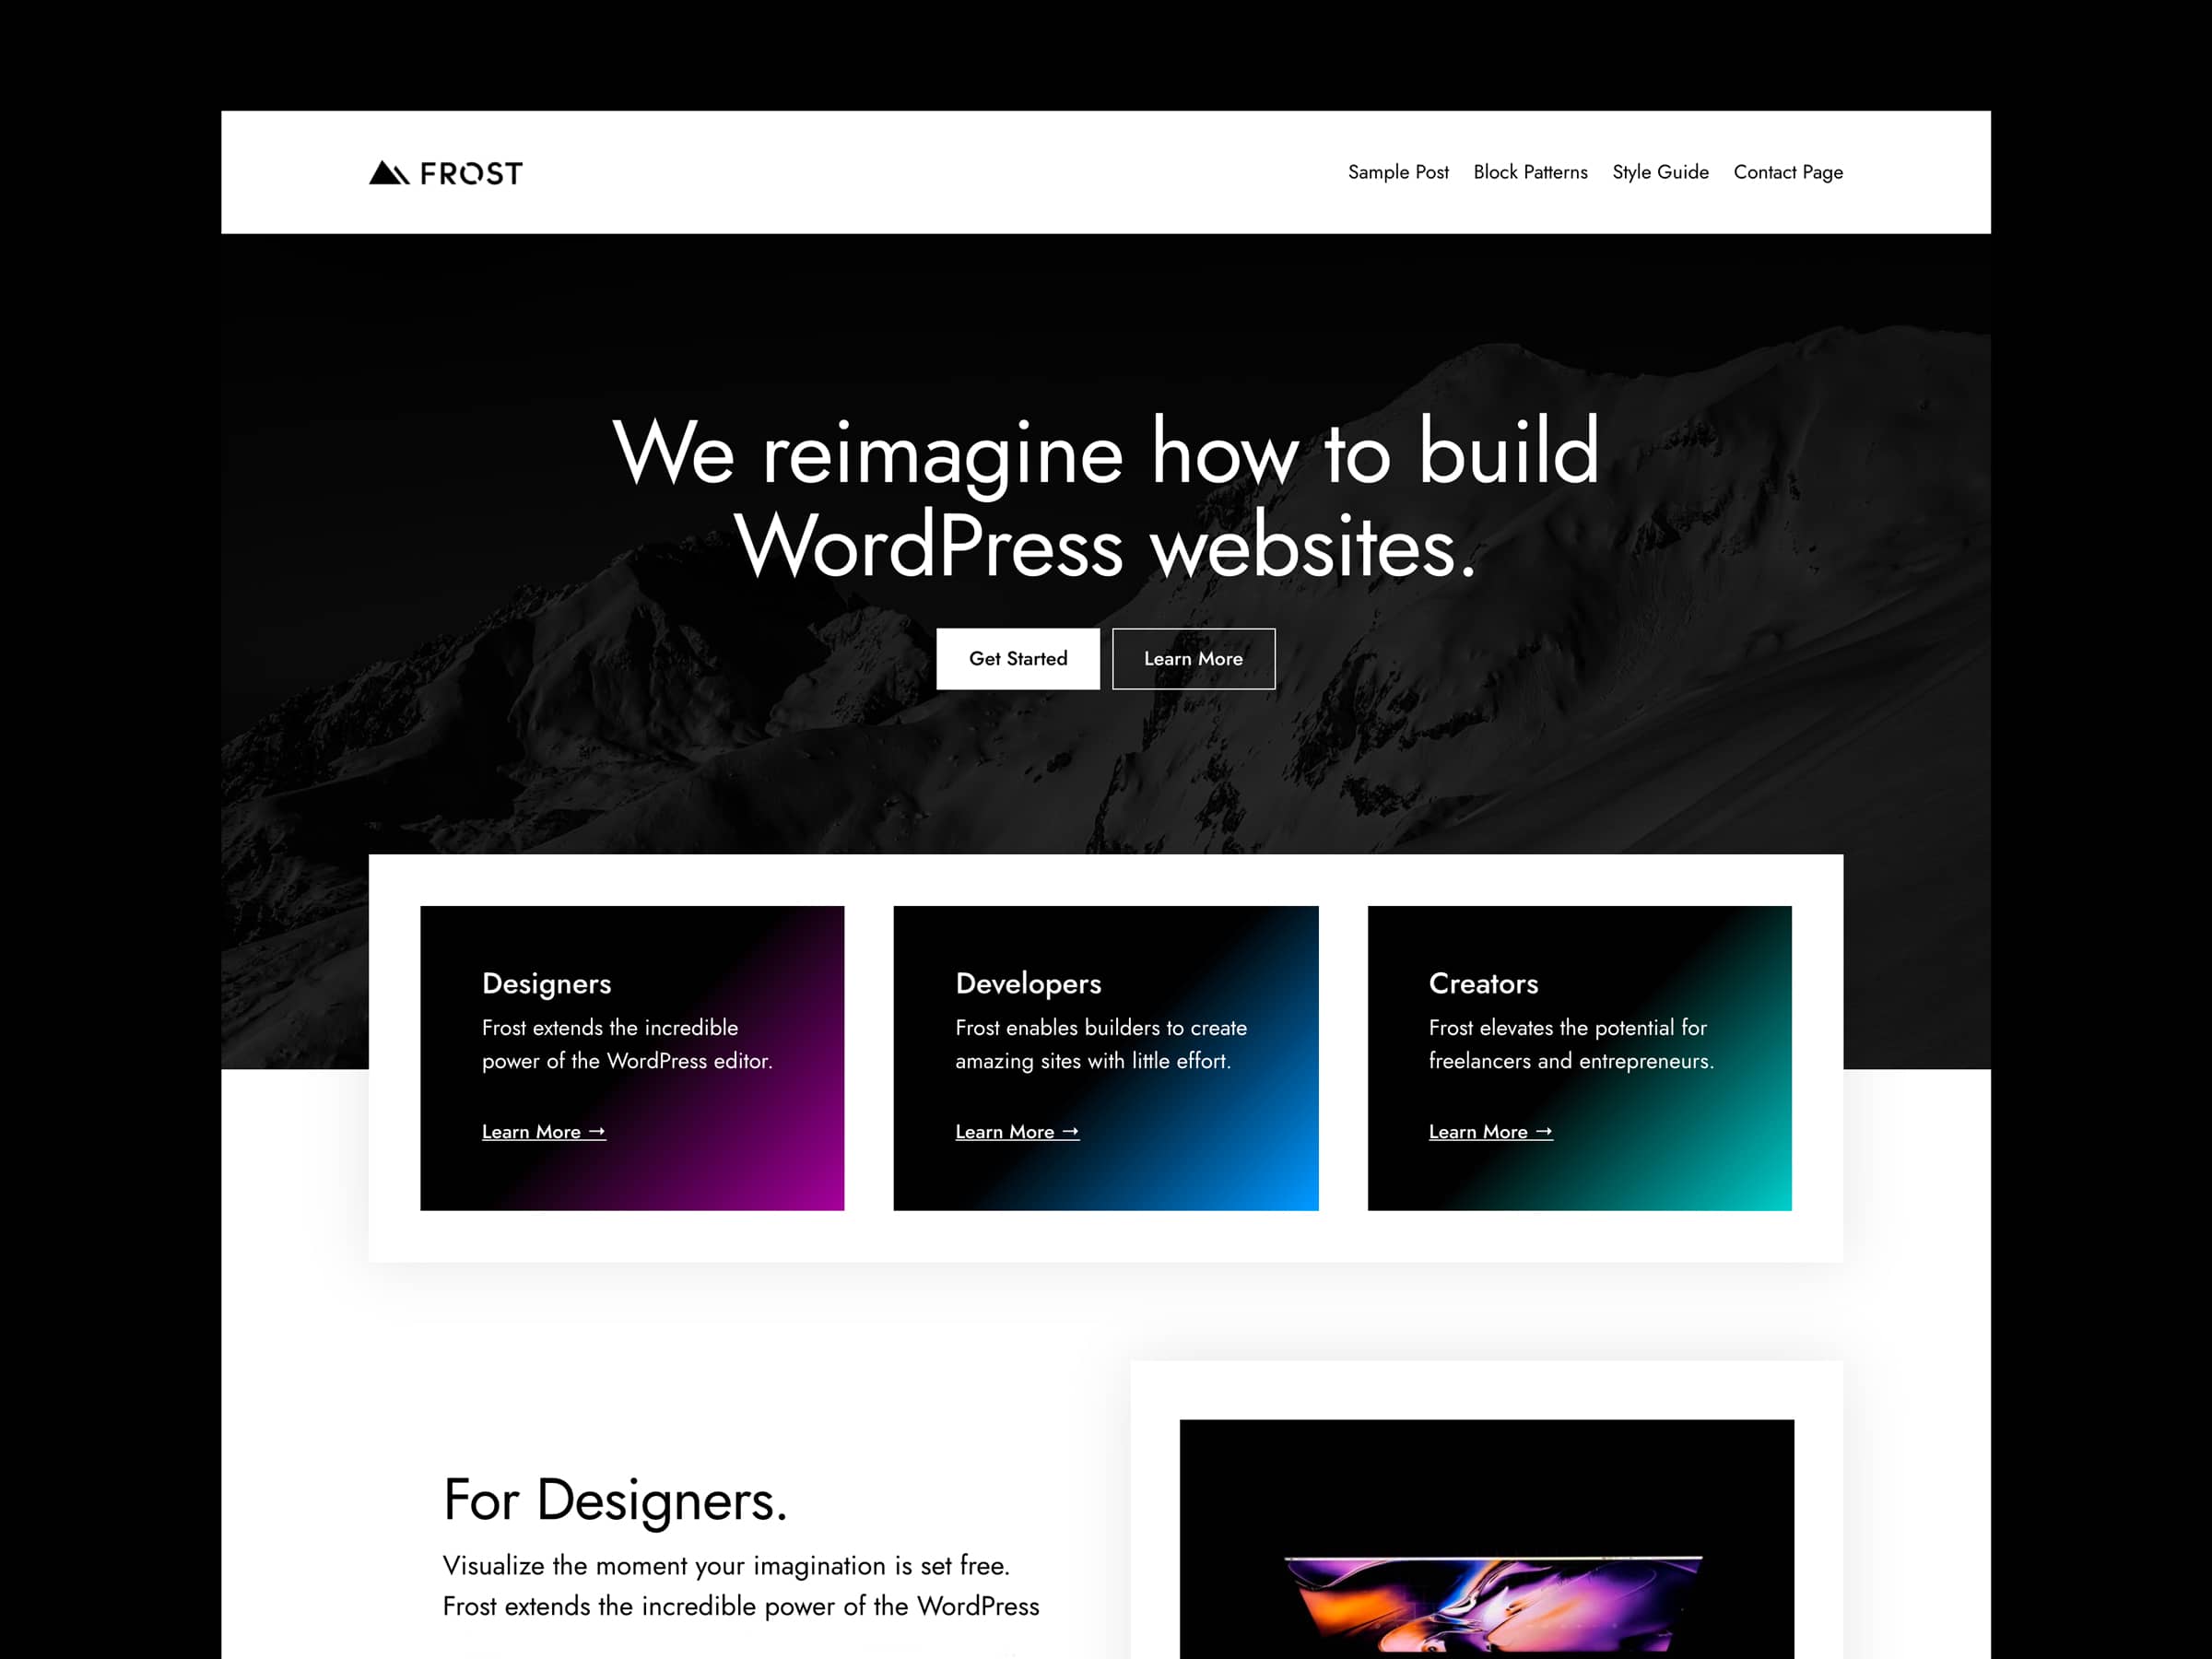 Screenshot of the Frost WordPress theme. It has a hero/intro area, followed by three boxes and a media + text section.